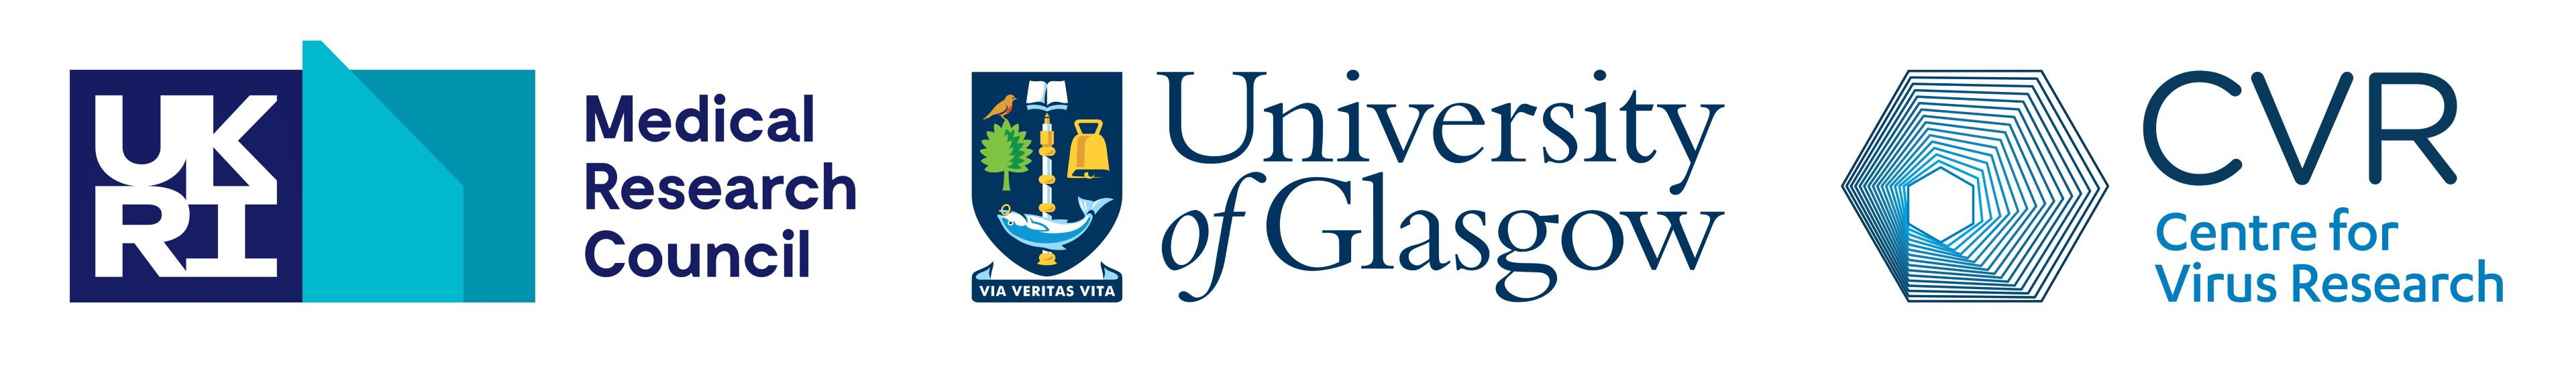 The Centre for Virus Research logo, showing the Medical Research Council, University of Glasgow, and CVR logos side by side. 